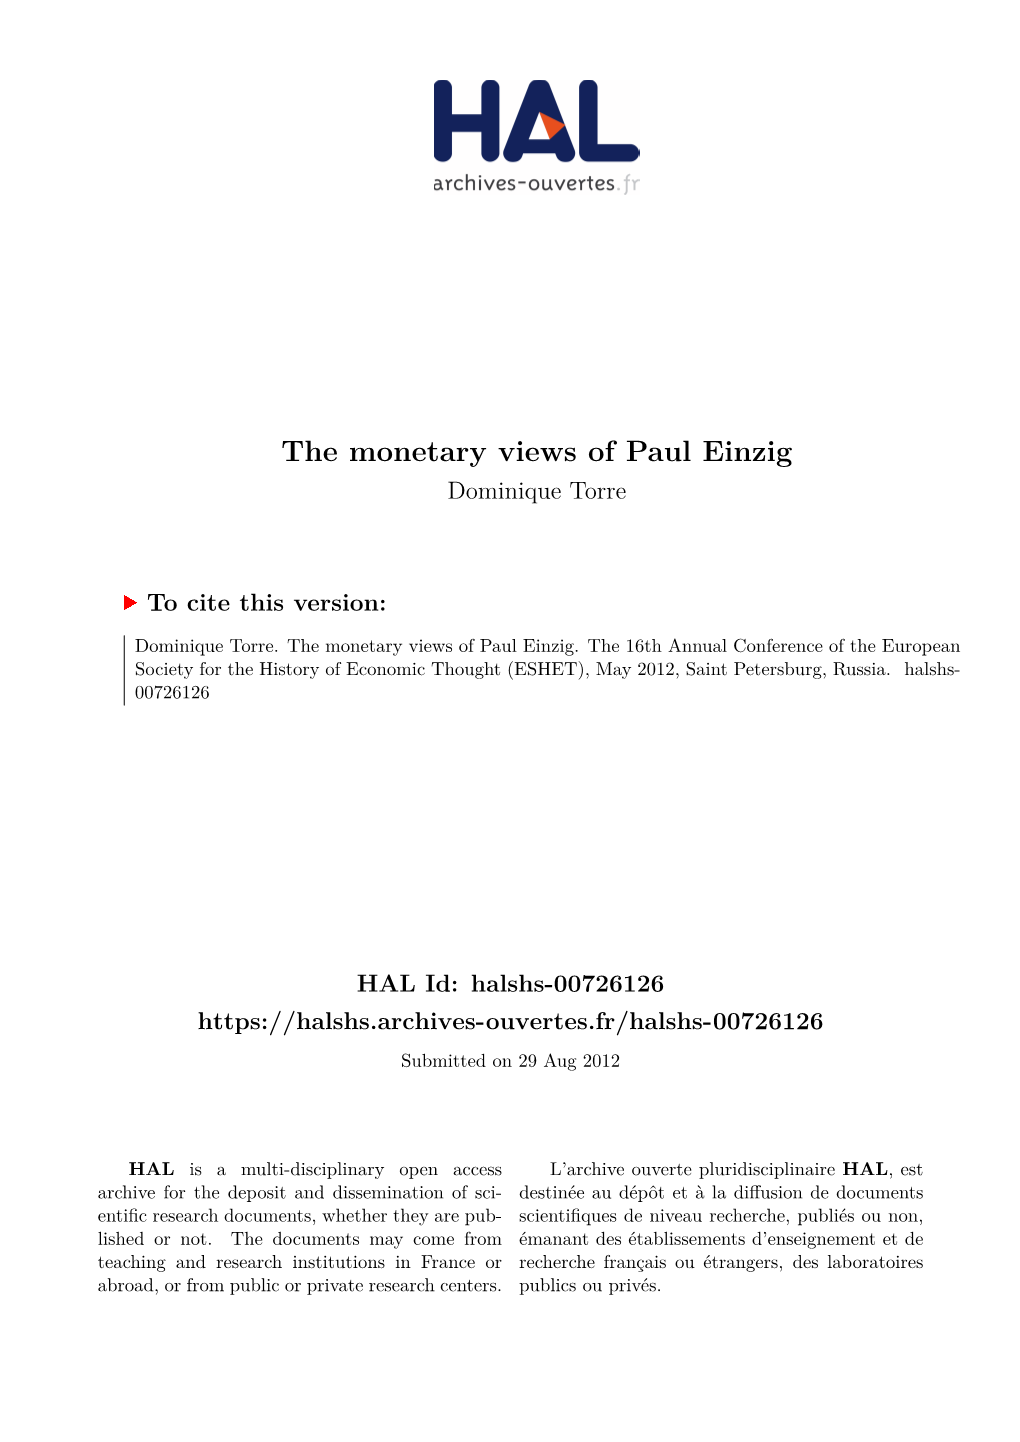 The Monetary Views of Paul Einzig Dominique Torre